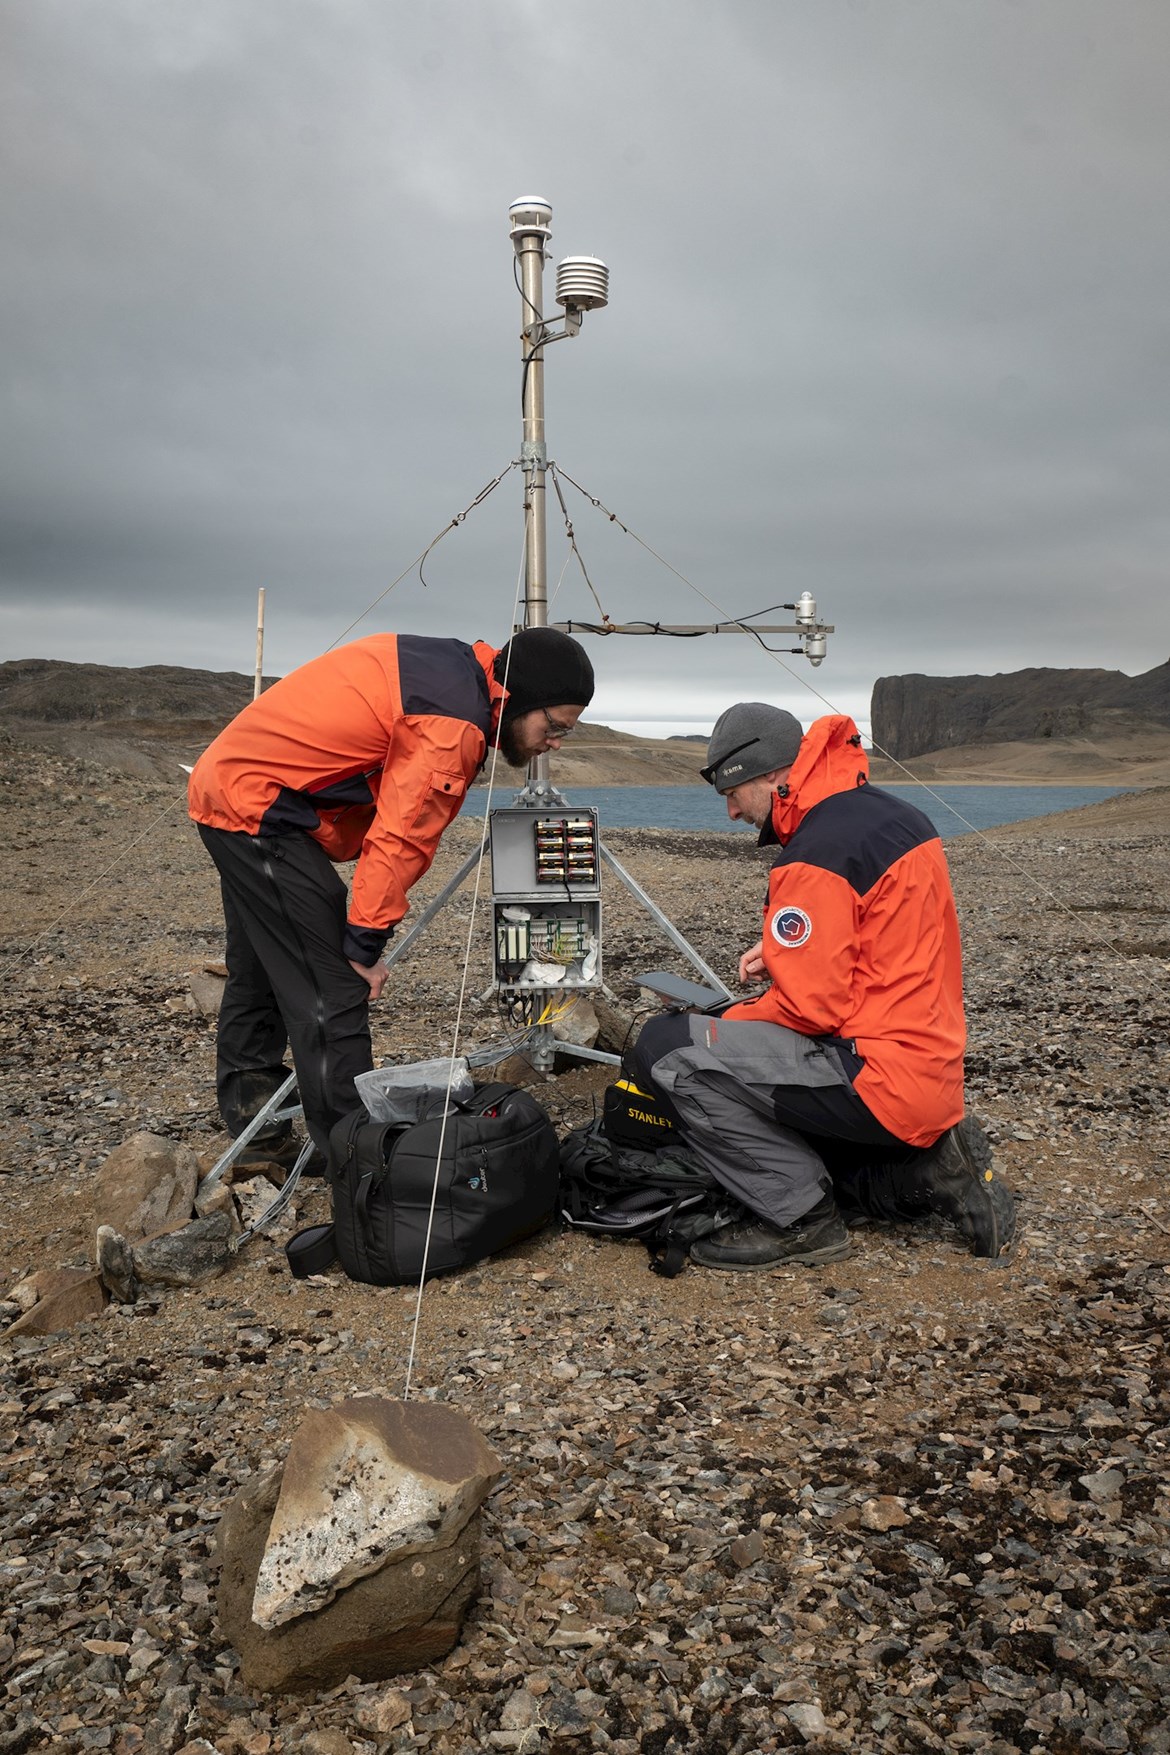 As every year, long-term climate monitoring and comprehensive monitoring of the state of polar geosystems and ecosystems took place in Antarctica. In the picture, Michael Matějka and Kamil Láska from the Institute of Geography, Faculty of Economics, MU. Photo: Petr Horký.